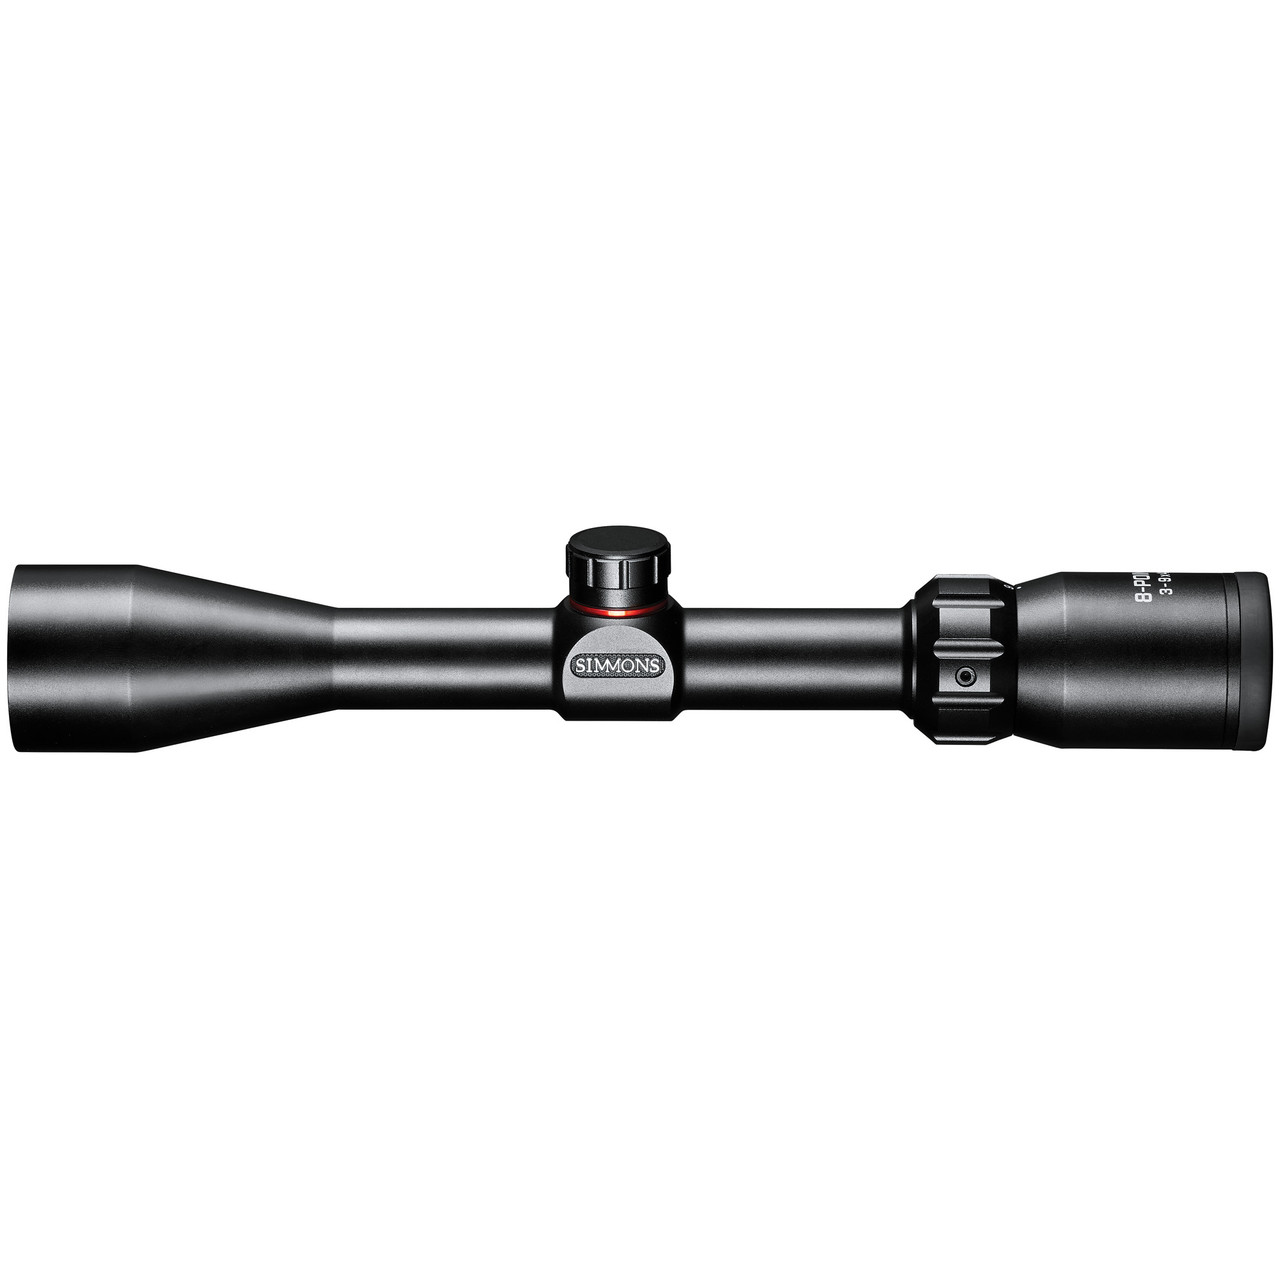 Simmons 8 Point 3-9x40 W/rings Black